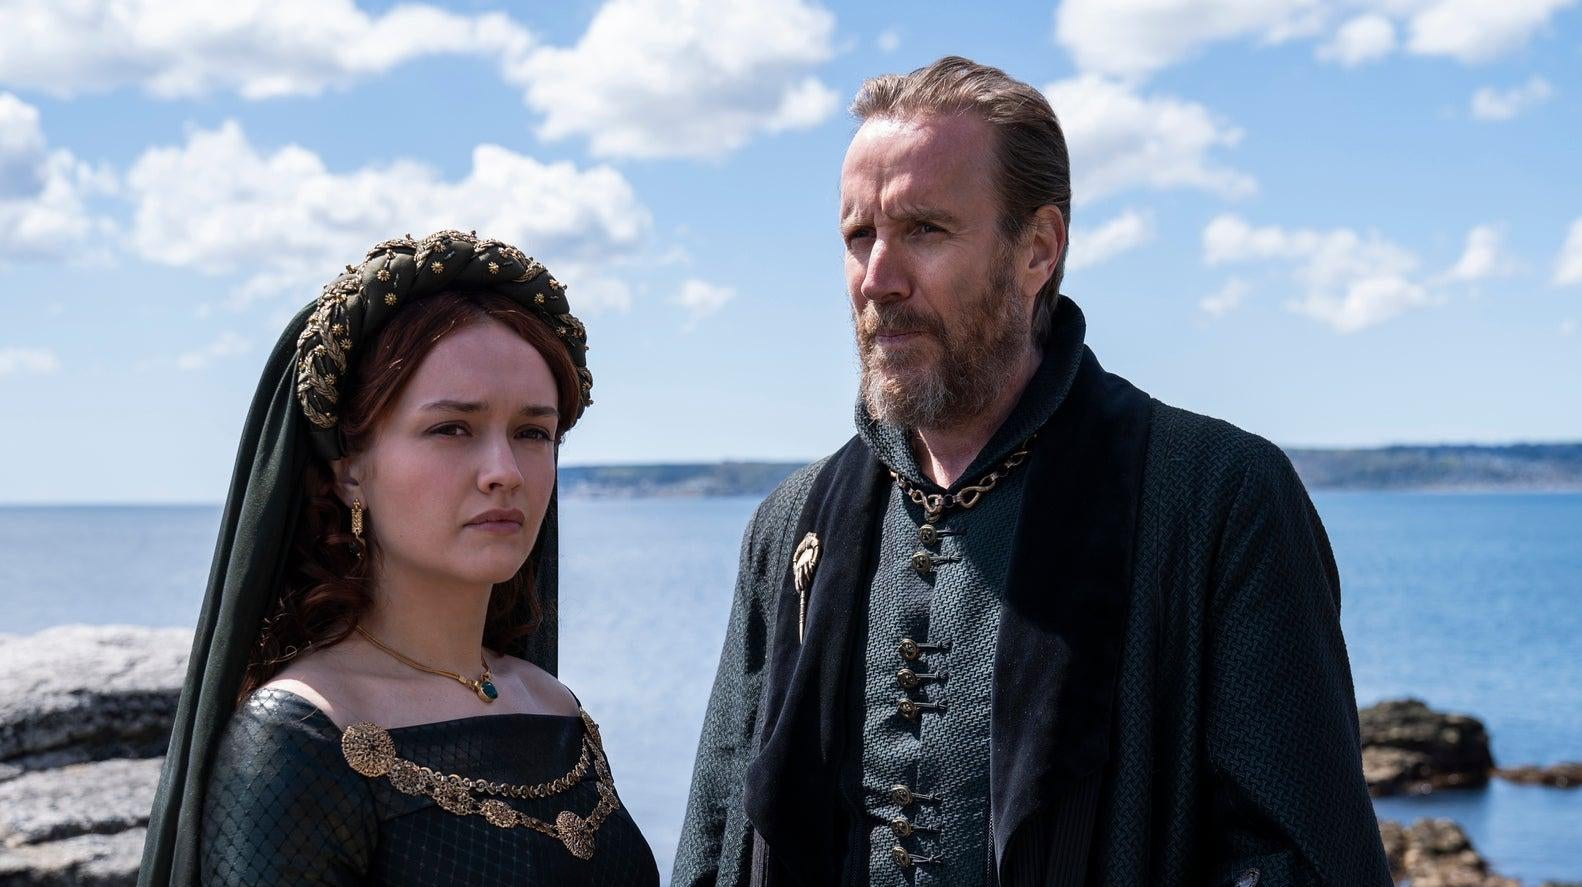 Olivia Cooke as Alicent Hightower and Rhys Ifans as Otto Hightower. (Image: HBO)